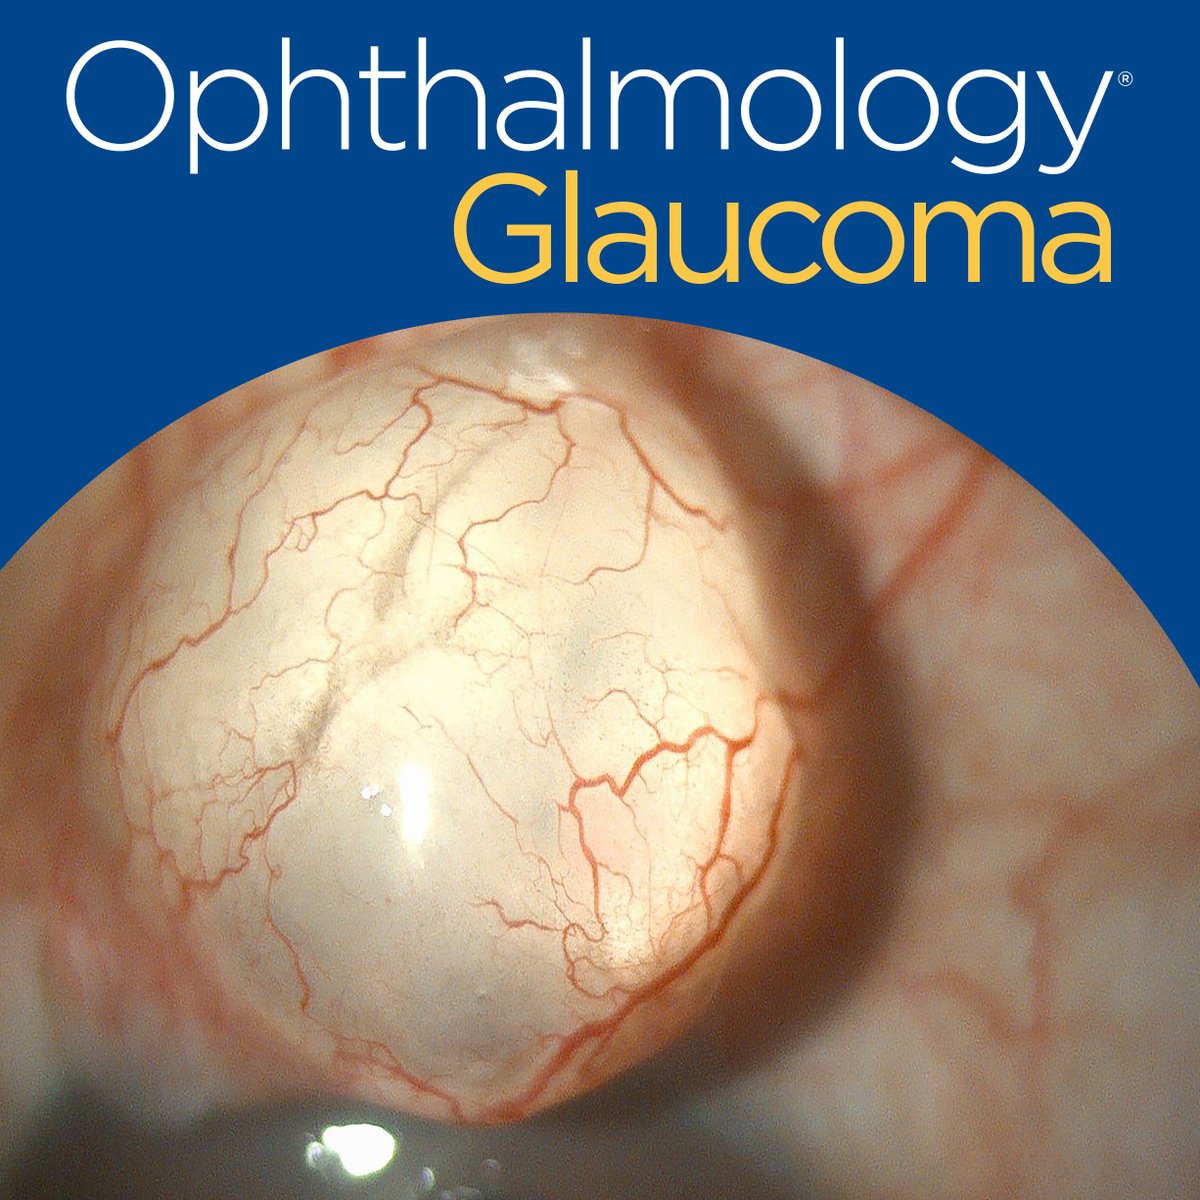 📣Registration is now open for the next Ophthalmology Virtual Journal Club! Join presenter Nazlee Zebardast, MD, and moderator @DrLorraineEyeMD for a discussion of “Optimal Performance of Selective Laser Trabeculoplasty” ow.ly/htoy50R9jow #Ophthalmology #Glaucoma